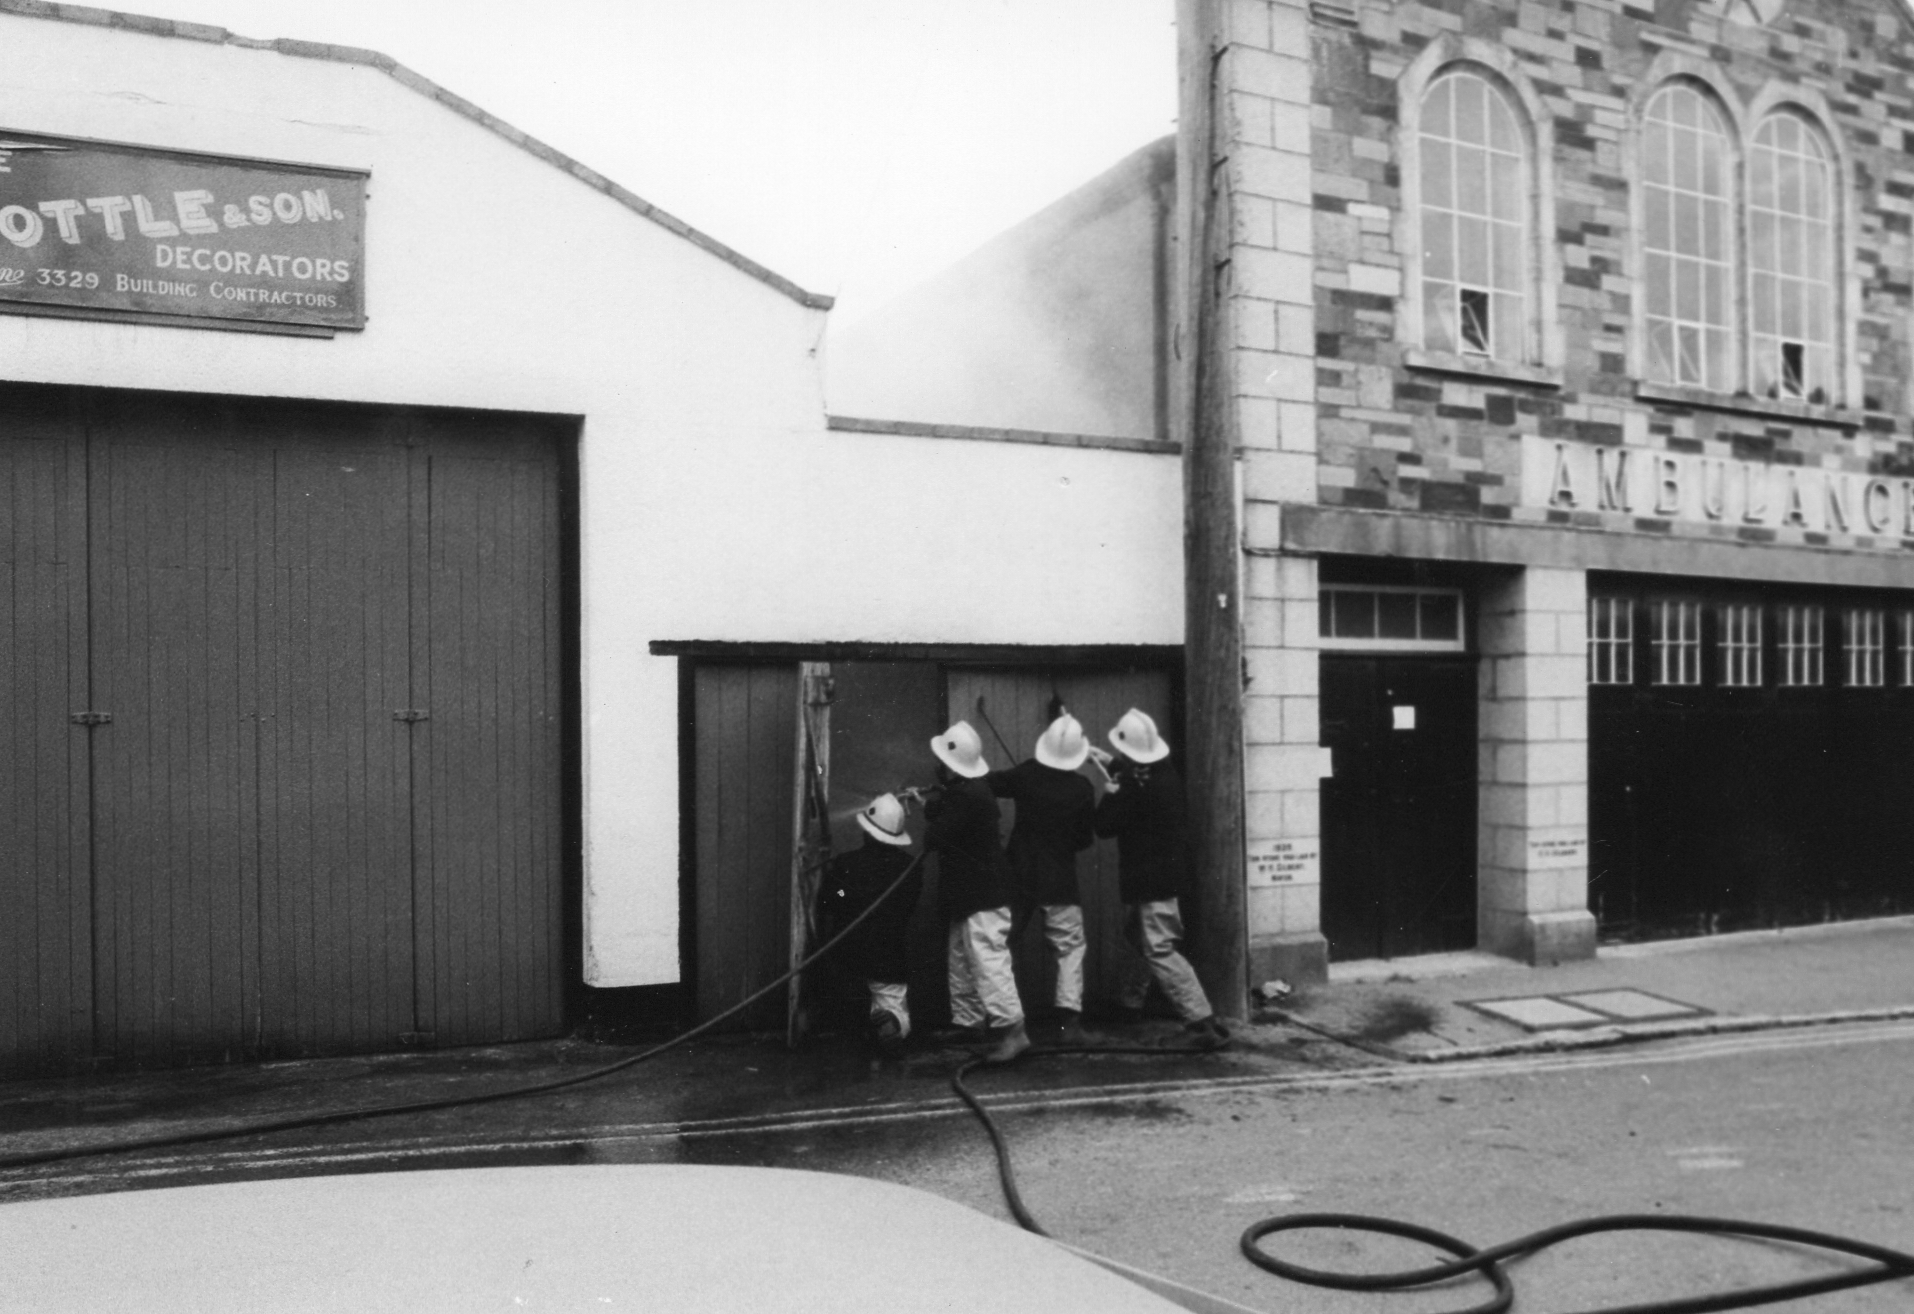 Fire at Charlie Cottle's Workshop in Westgate Street, June 17th, 1982. Photo courtesy of Gary Chapman.